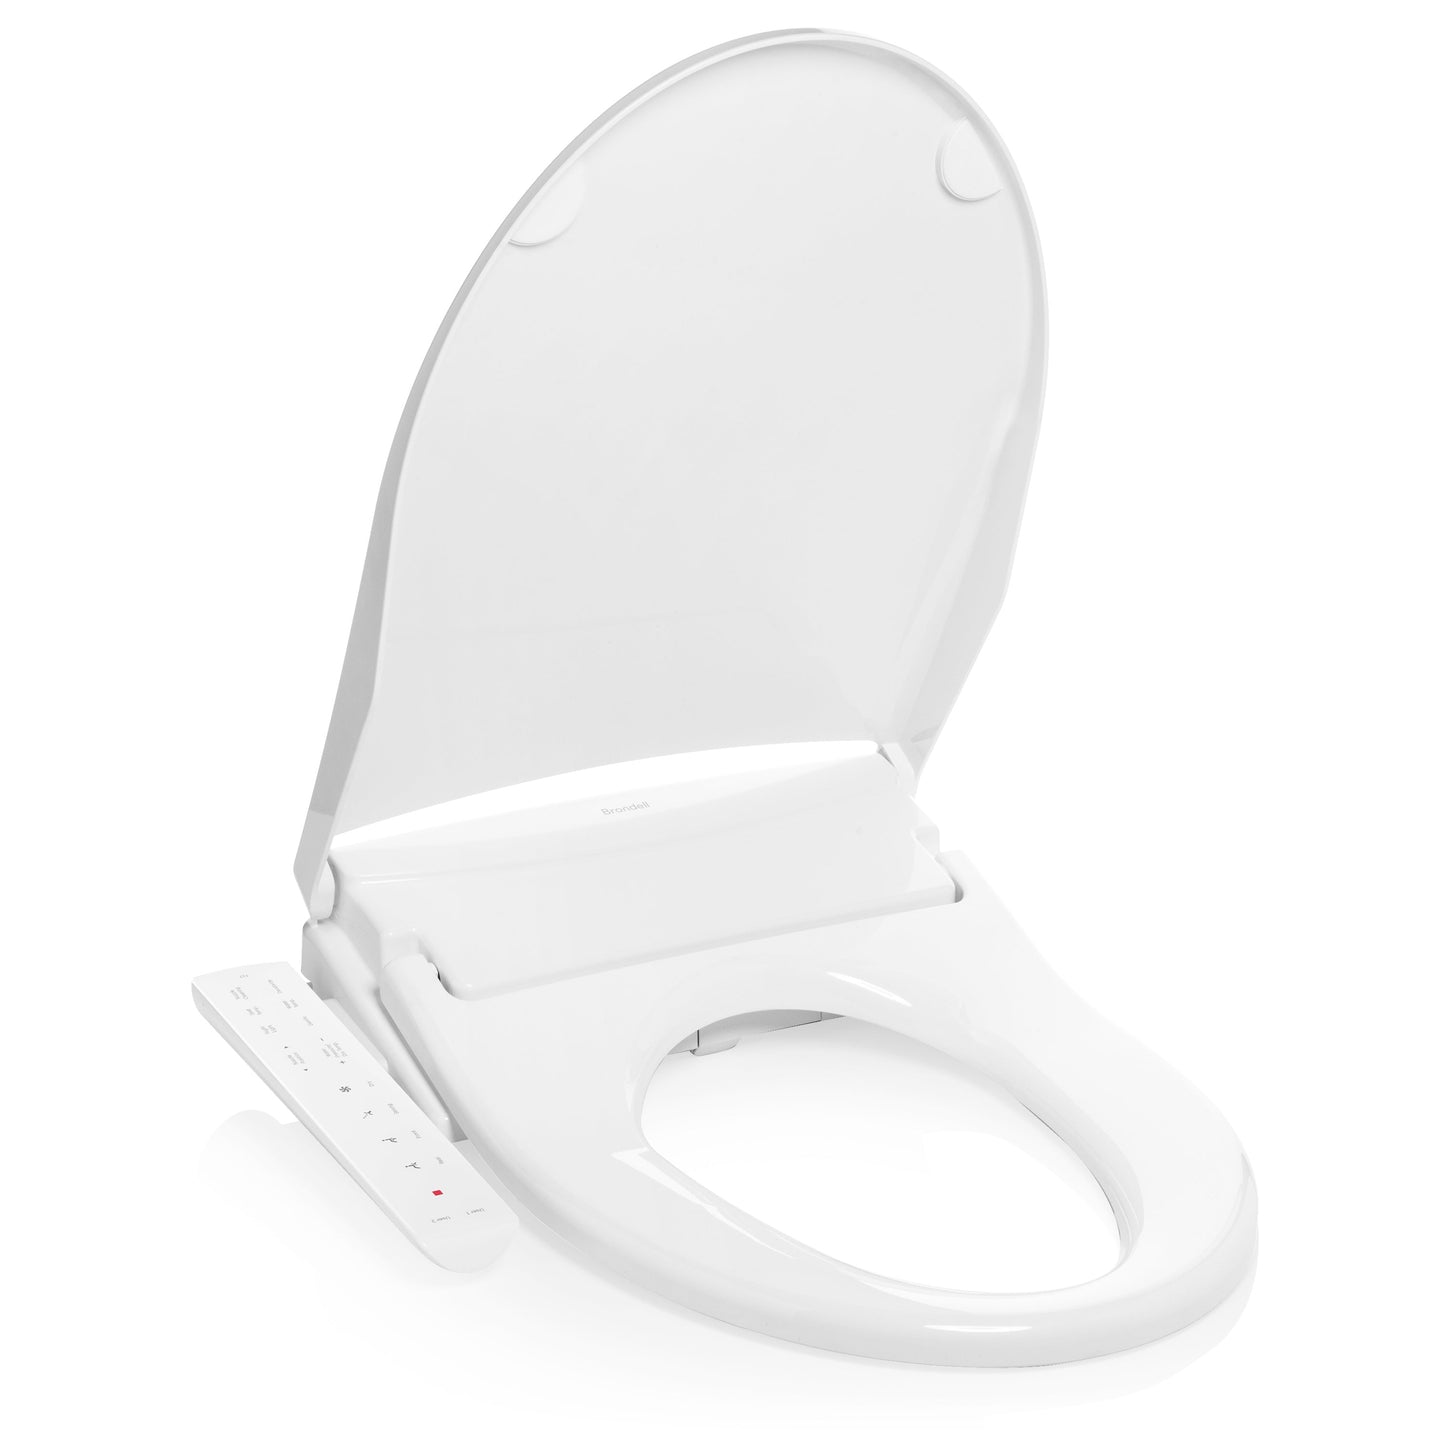 Brondell Swash Thinline T22 Electronic Bidet Seat with Side Arm Control